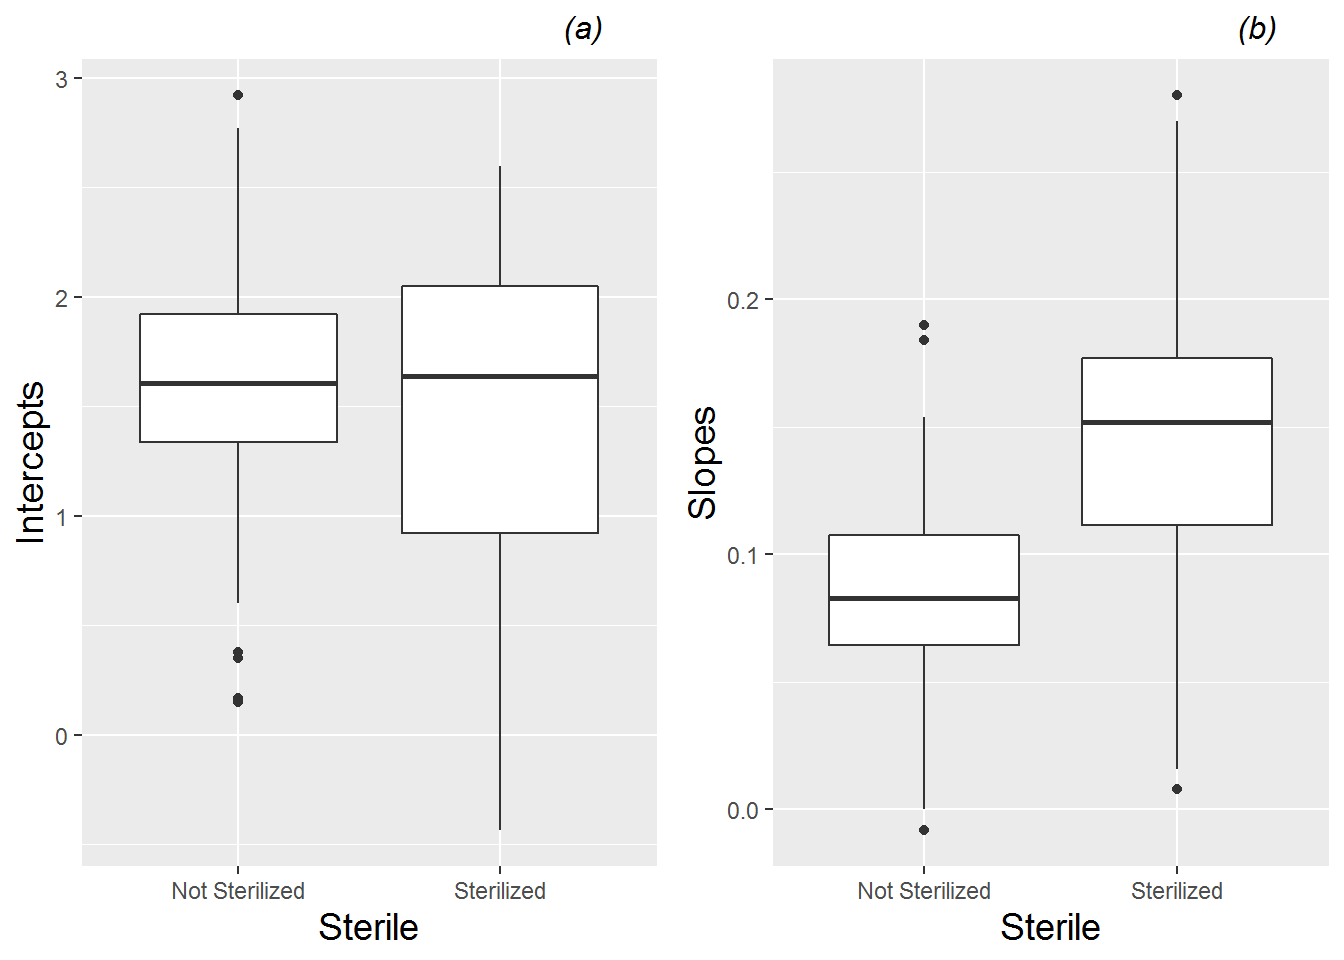 Boxplots of (a) intercepts and (b) slopes for all leadplants by sterilization, based on a linear fit to height data from each plant.